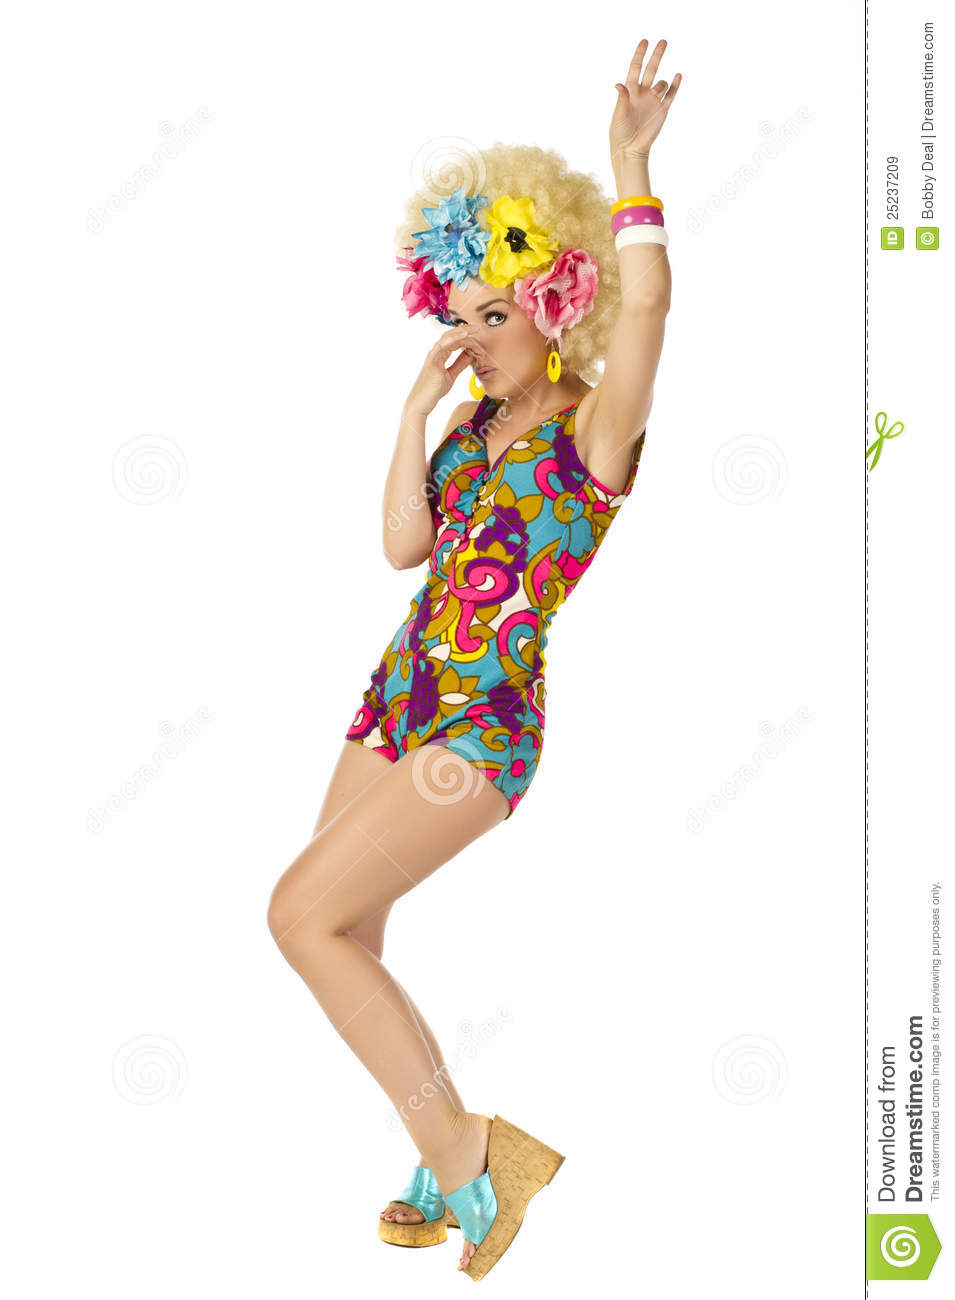 1960 S Flower Power Royalty Free Stock Images   Image  25237209